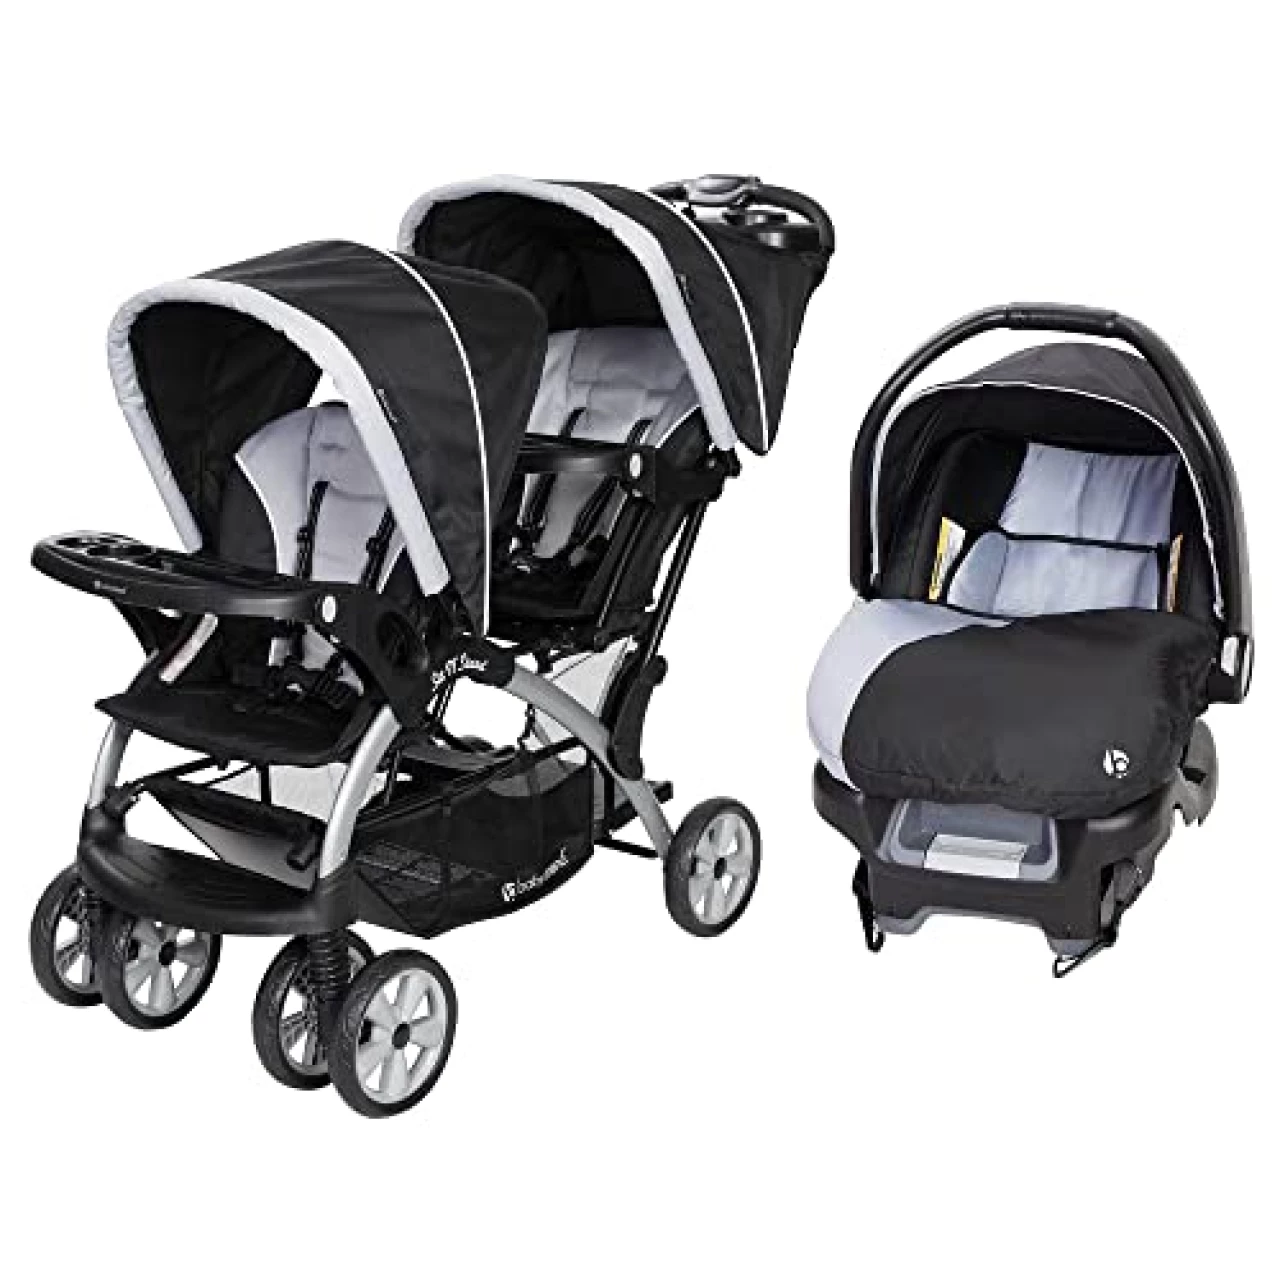 Baby Trend Sit N Stand Easy Fold Double Baby Stroller and Single Infant Car Seat Travel System